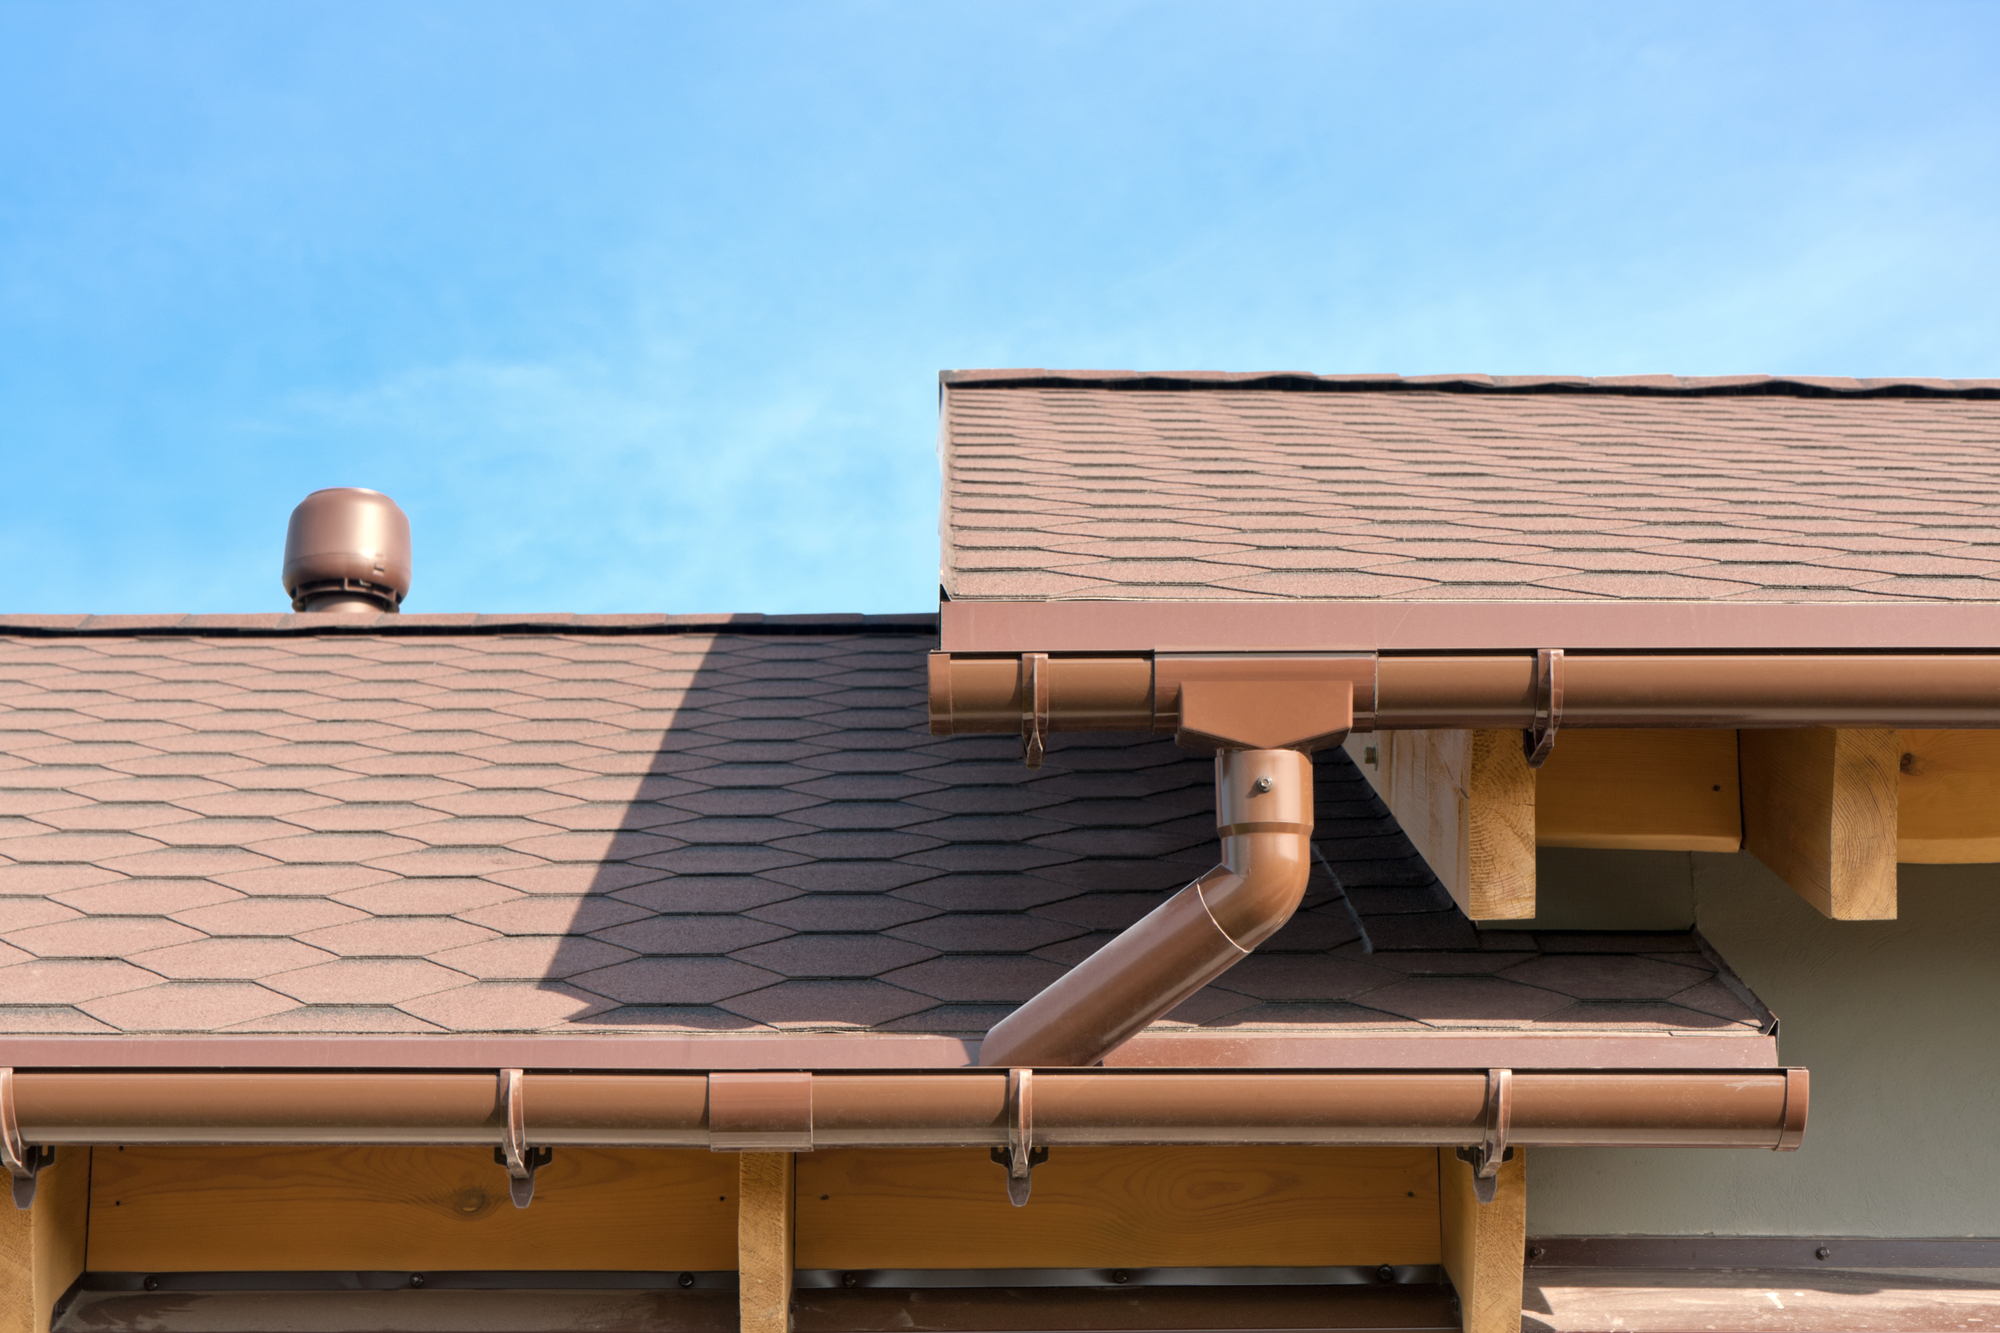 House Roof and Gutters